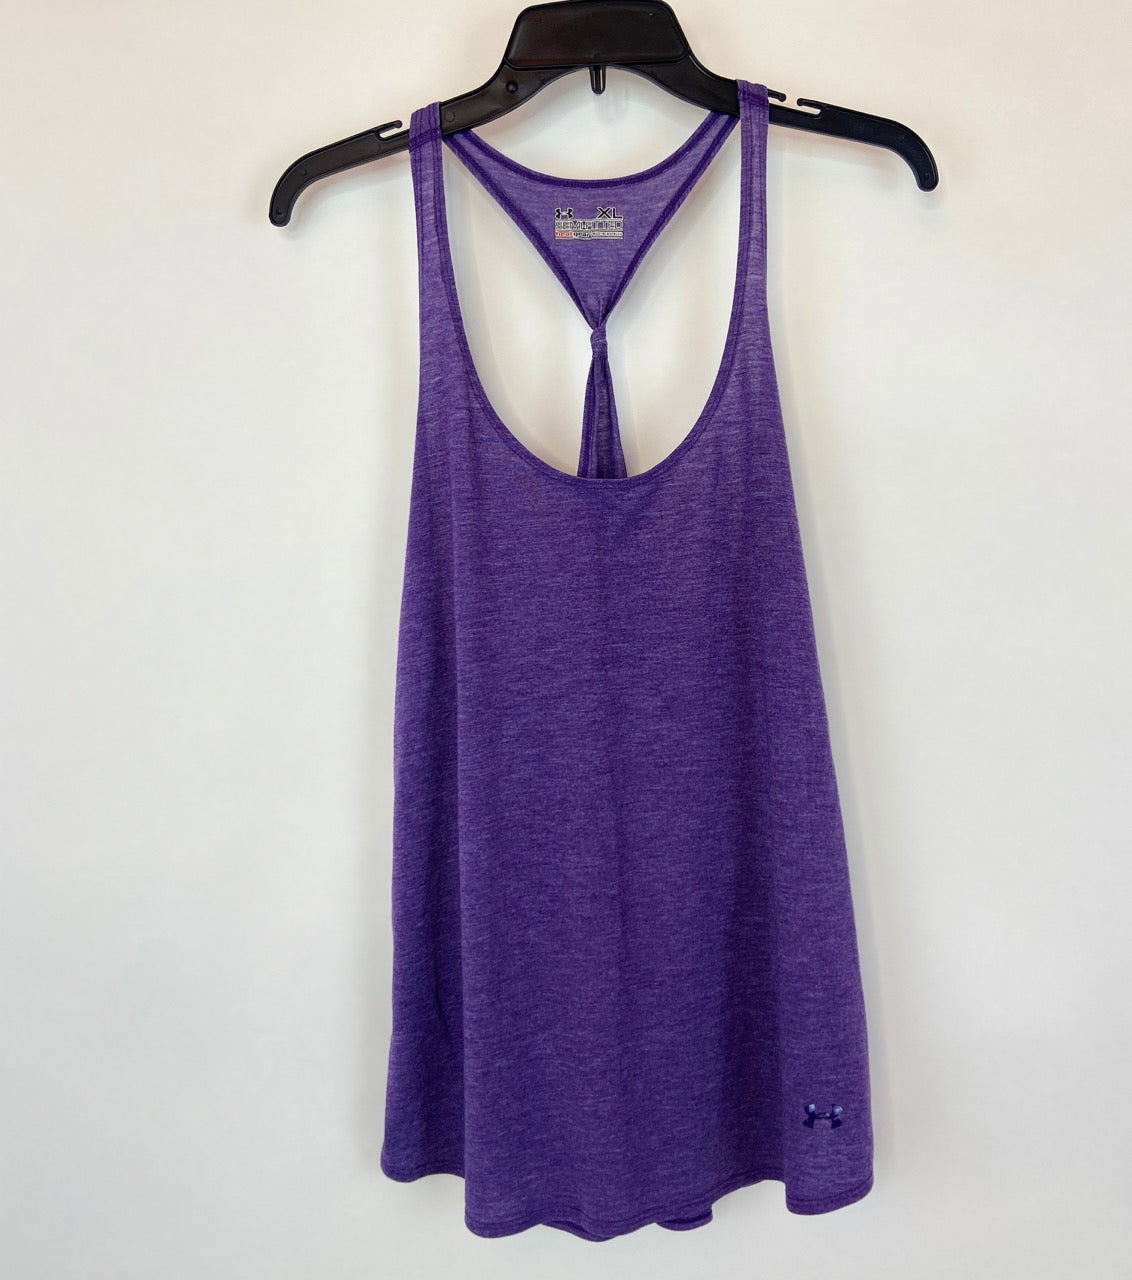 Under Armour Semi-Fitted Knotted Razor Back Tank- XL